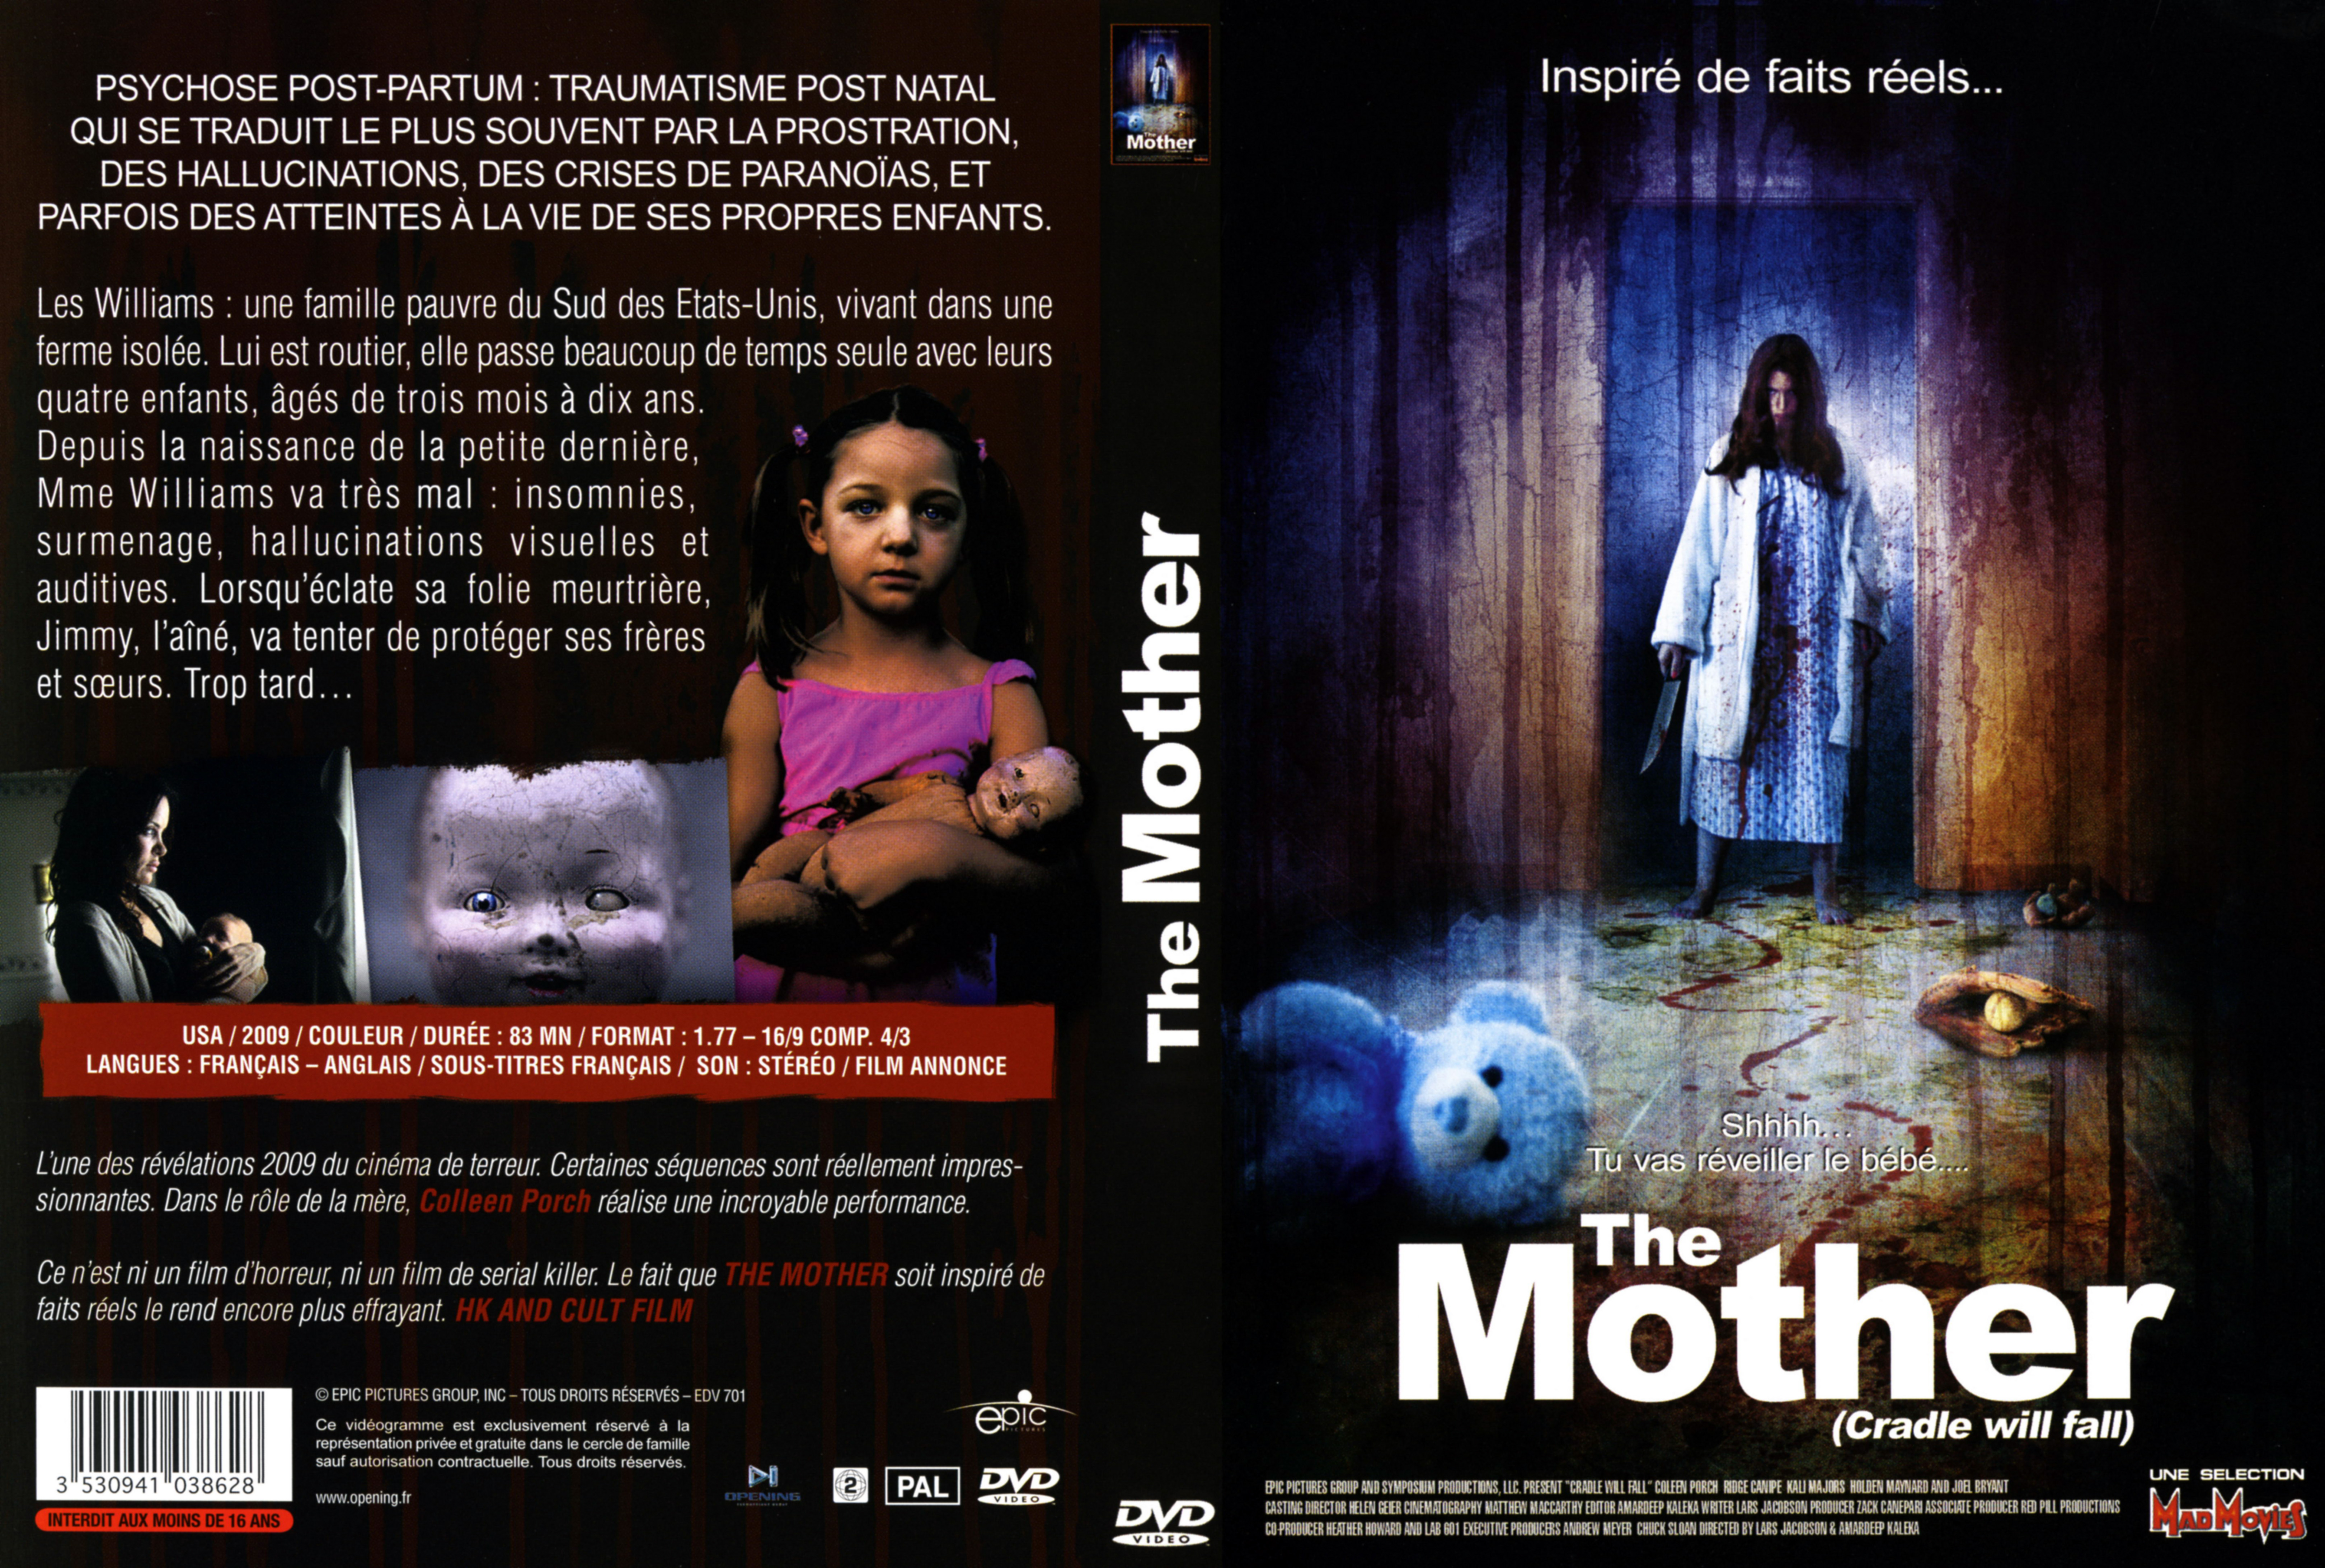 Jaquette DVD The mother